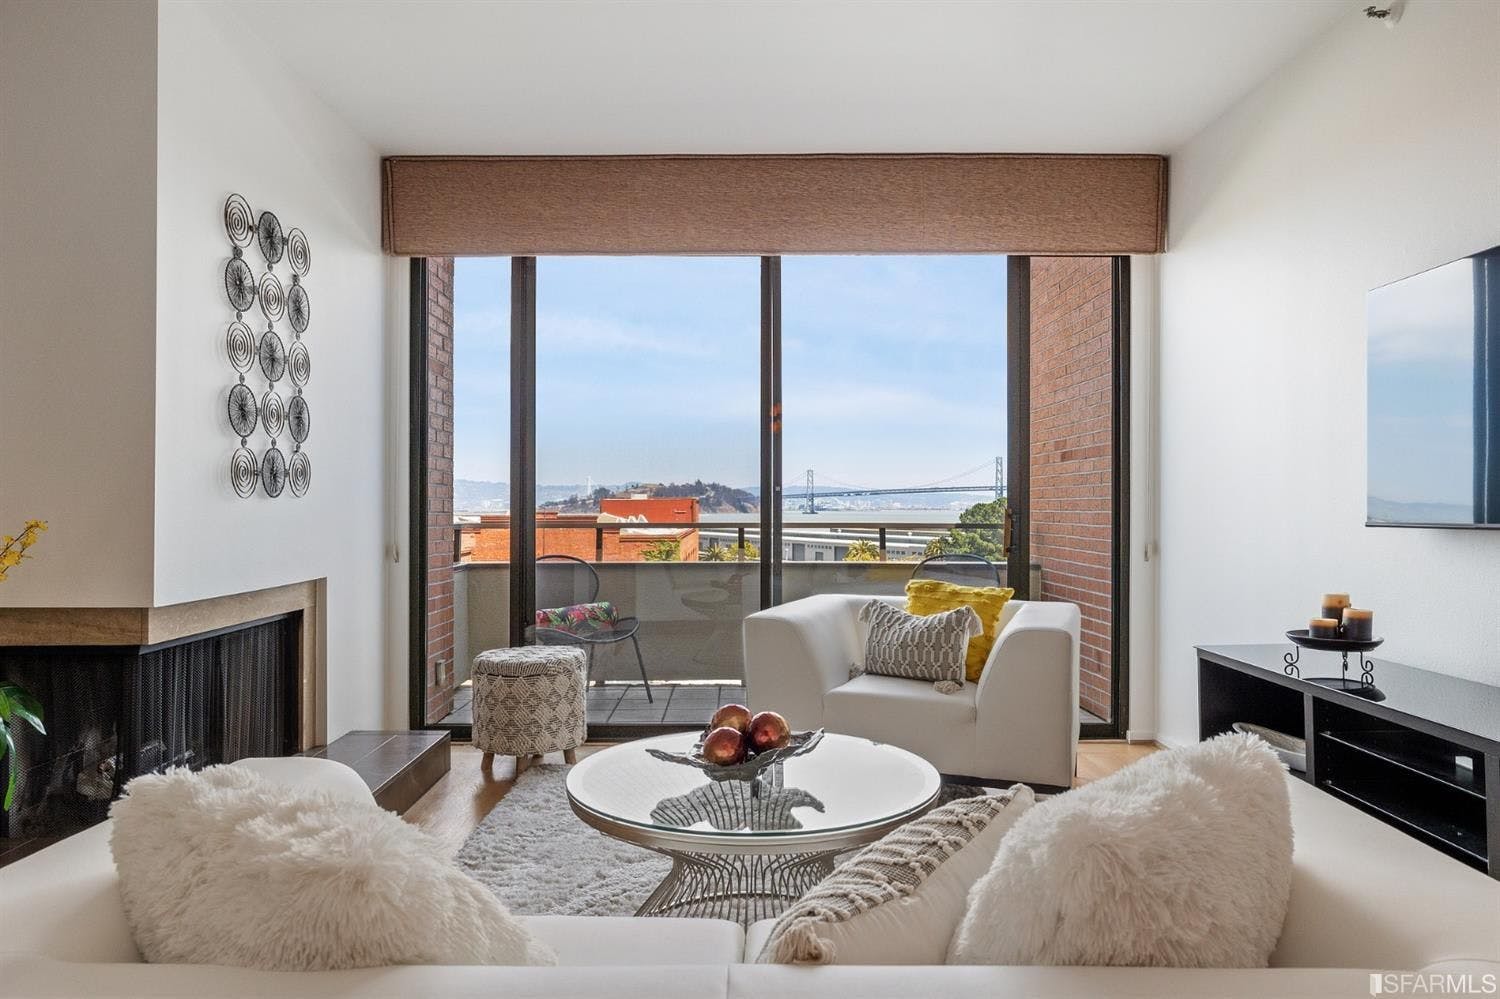 Homes in the 101 Lombard Condominiums use tall ceilings and floor-to-ceiling windows to emphasize natural lighting and views. Many of the homes also have wide-plank hardwood flooring. 